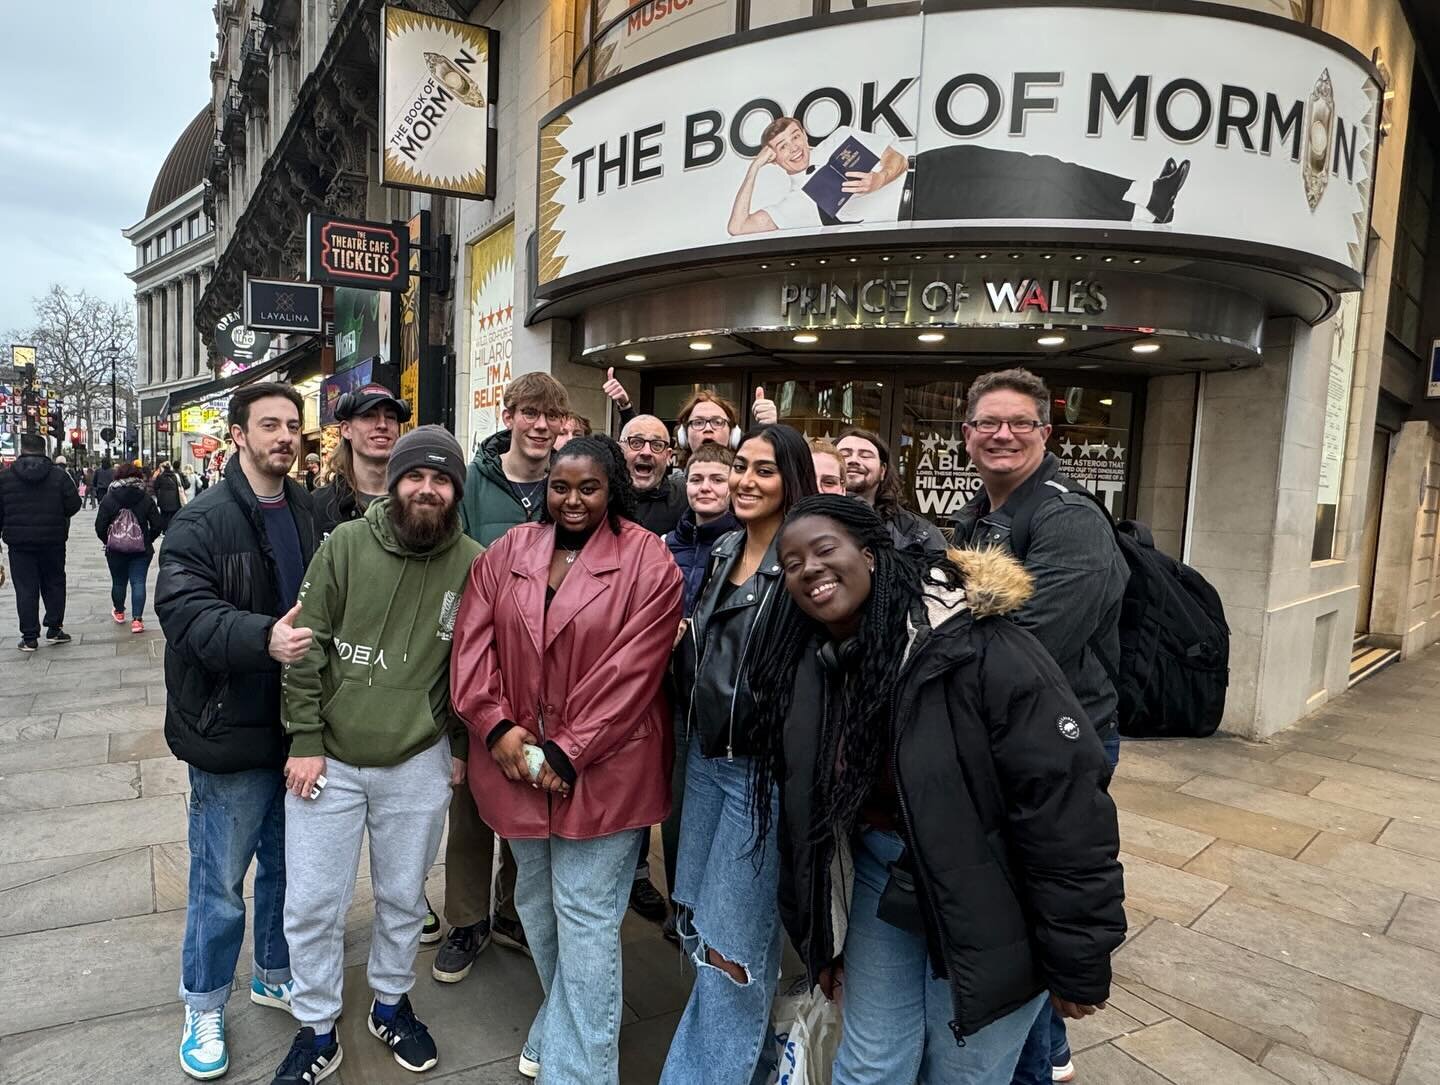 Took part of the UON gang off site to #TheBookOfMorman in the West End today! What a day out and a real experience for all, big thanks to @tim.smart.568 and @stace3624 for organising this! A great opportunity for our students.